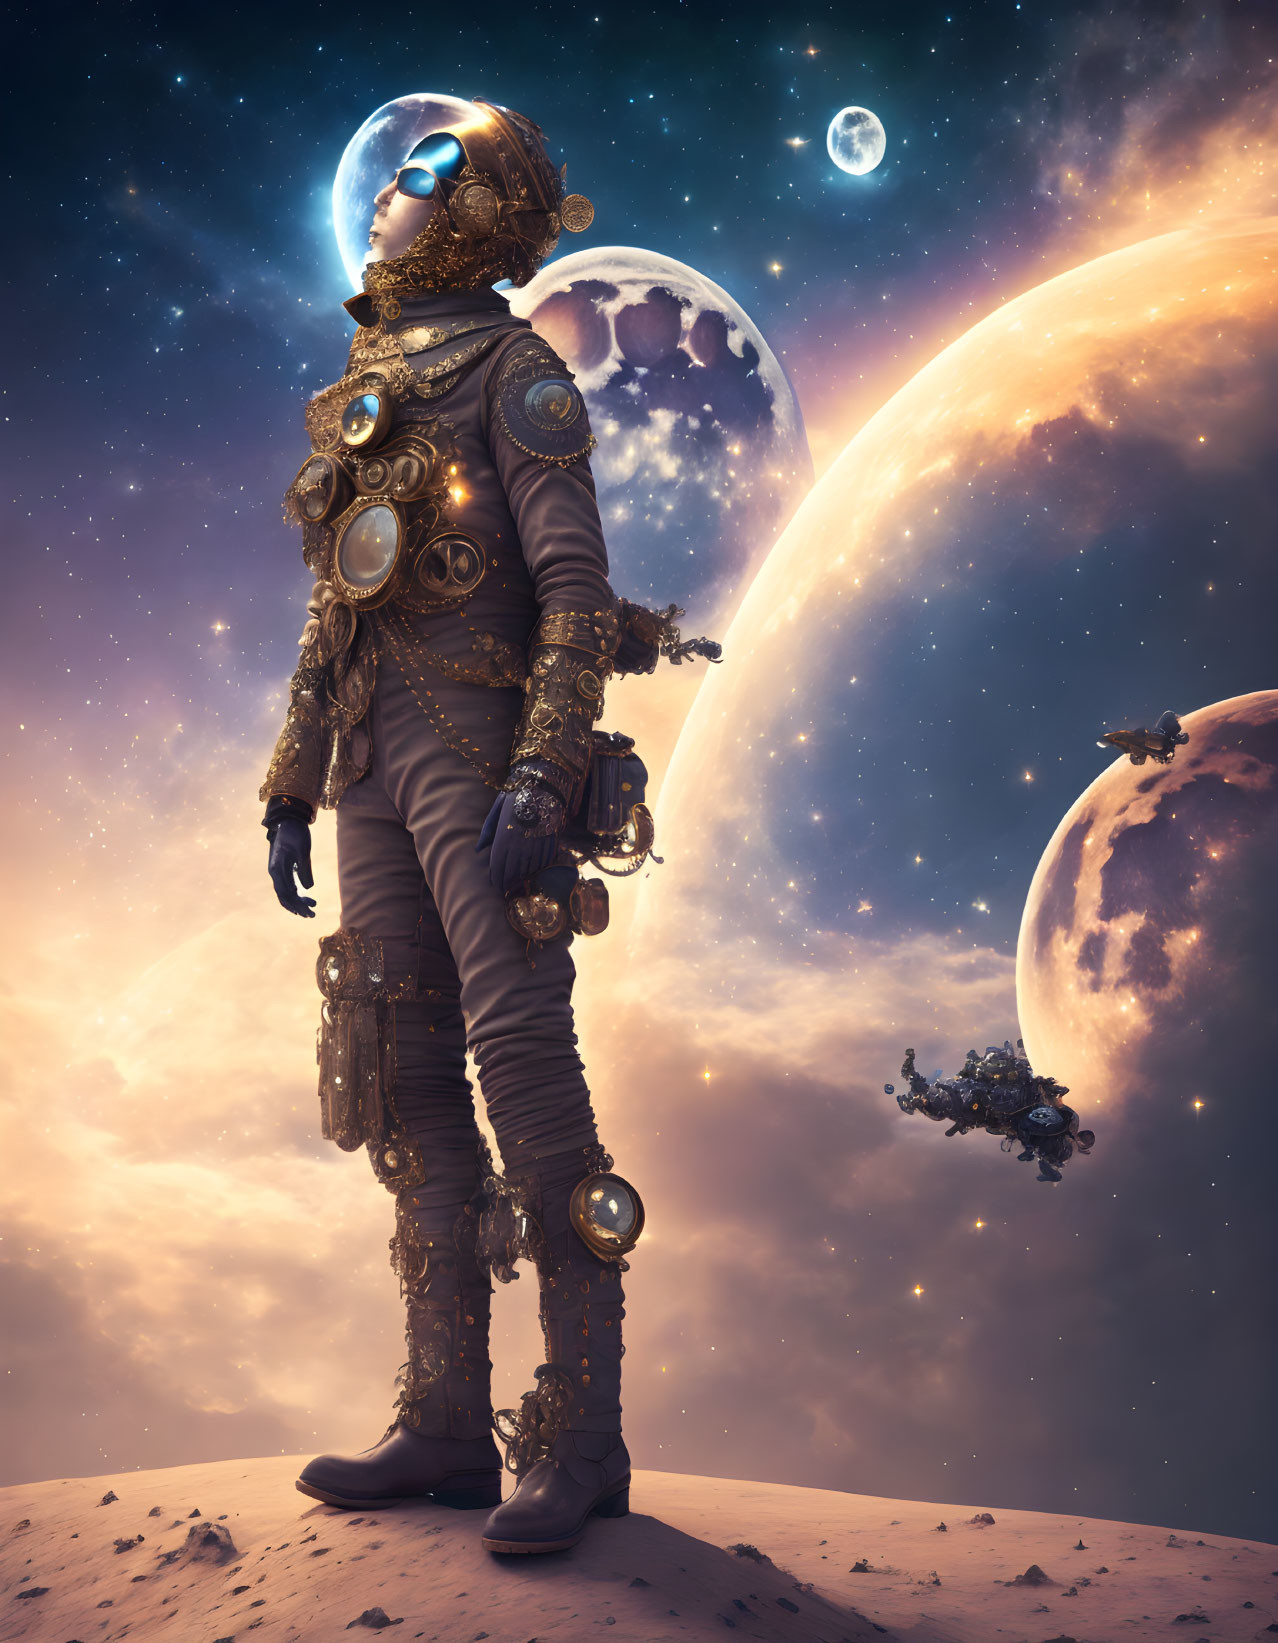 Steampunk astronaut on alien landscape with moons and starry sky